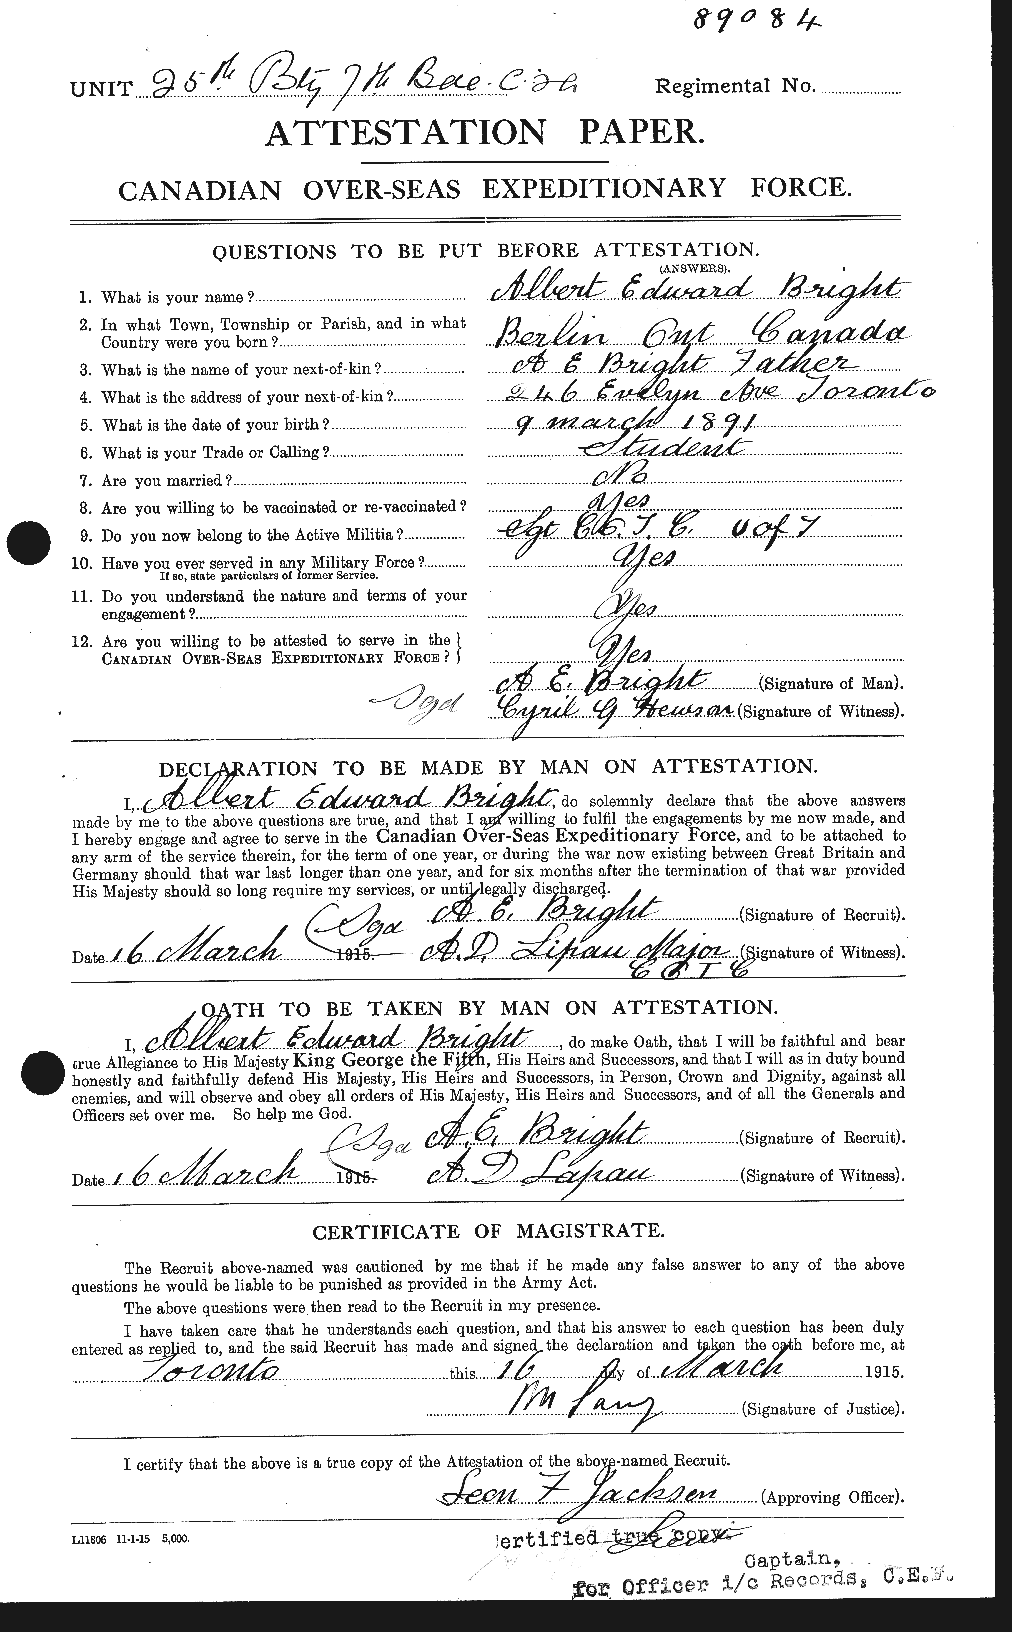 Personnel Records of the First World War - CEF 264144a